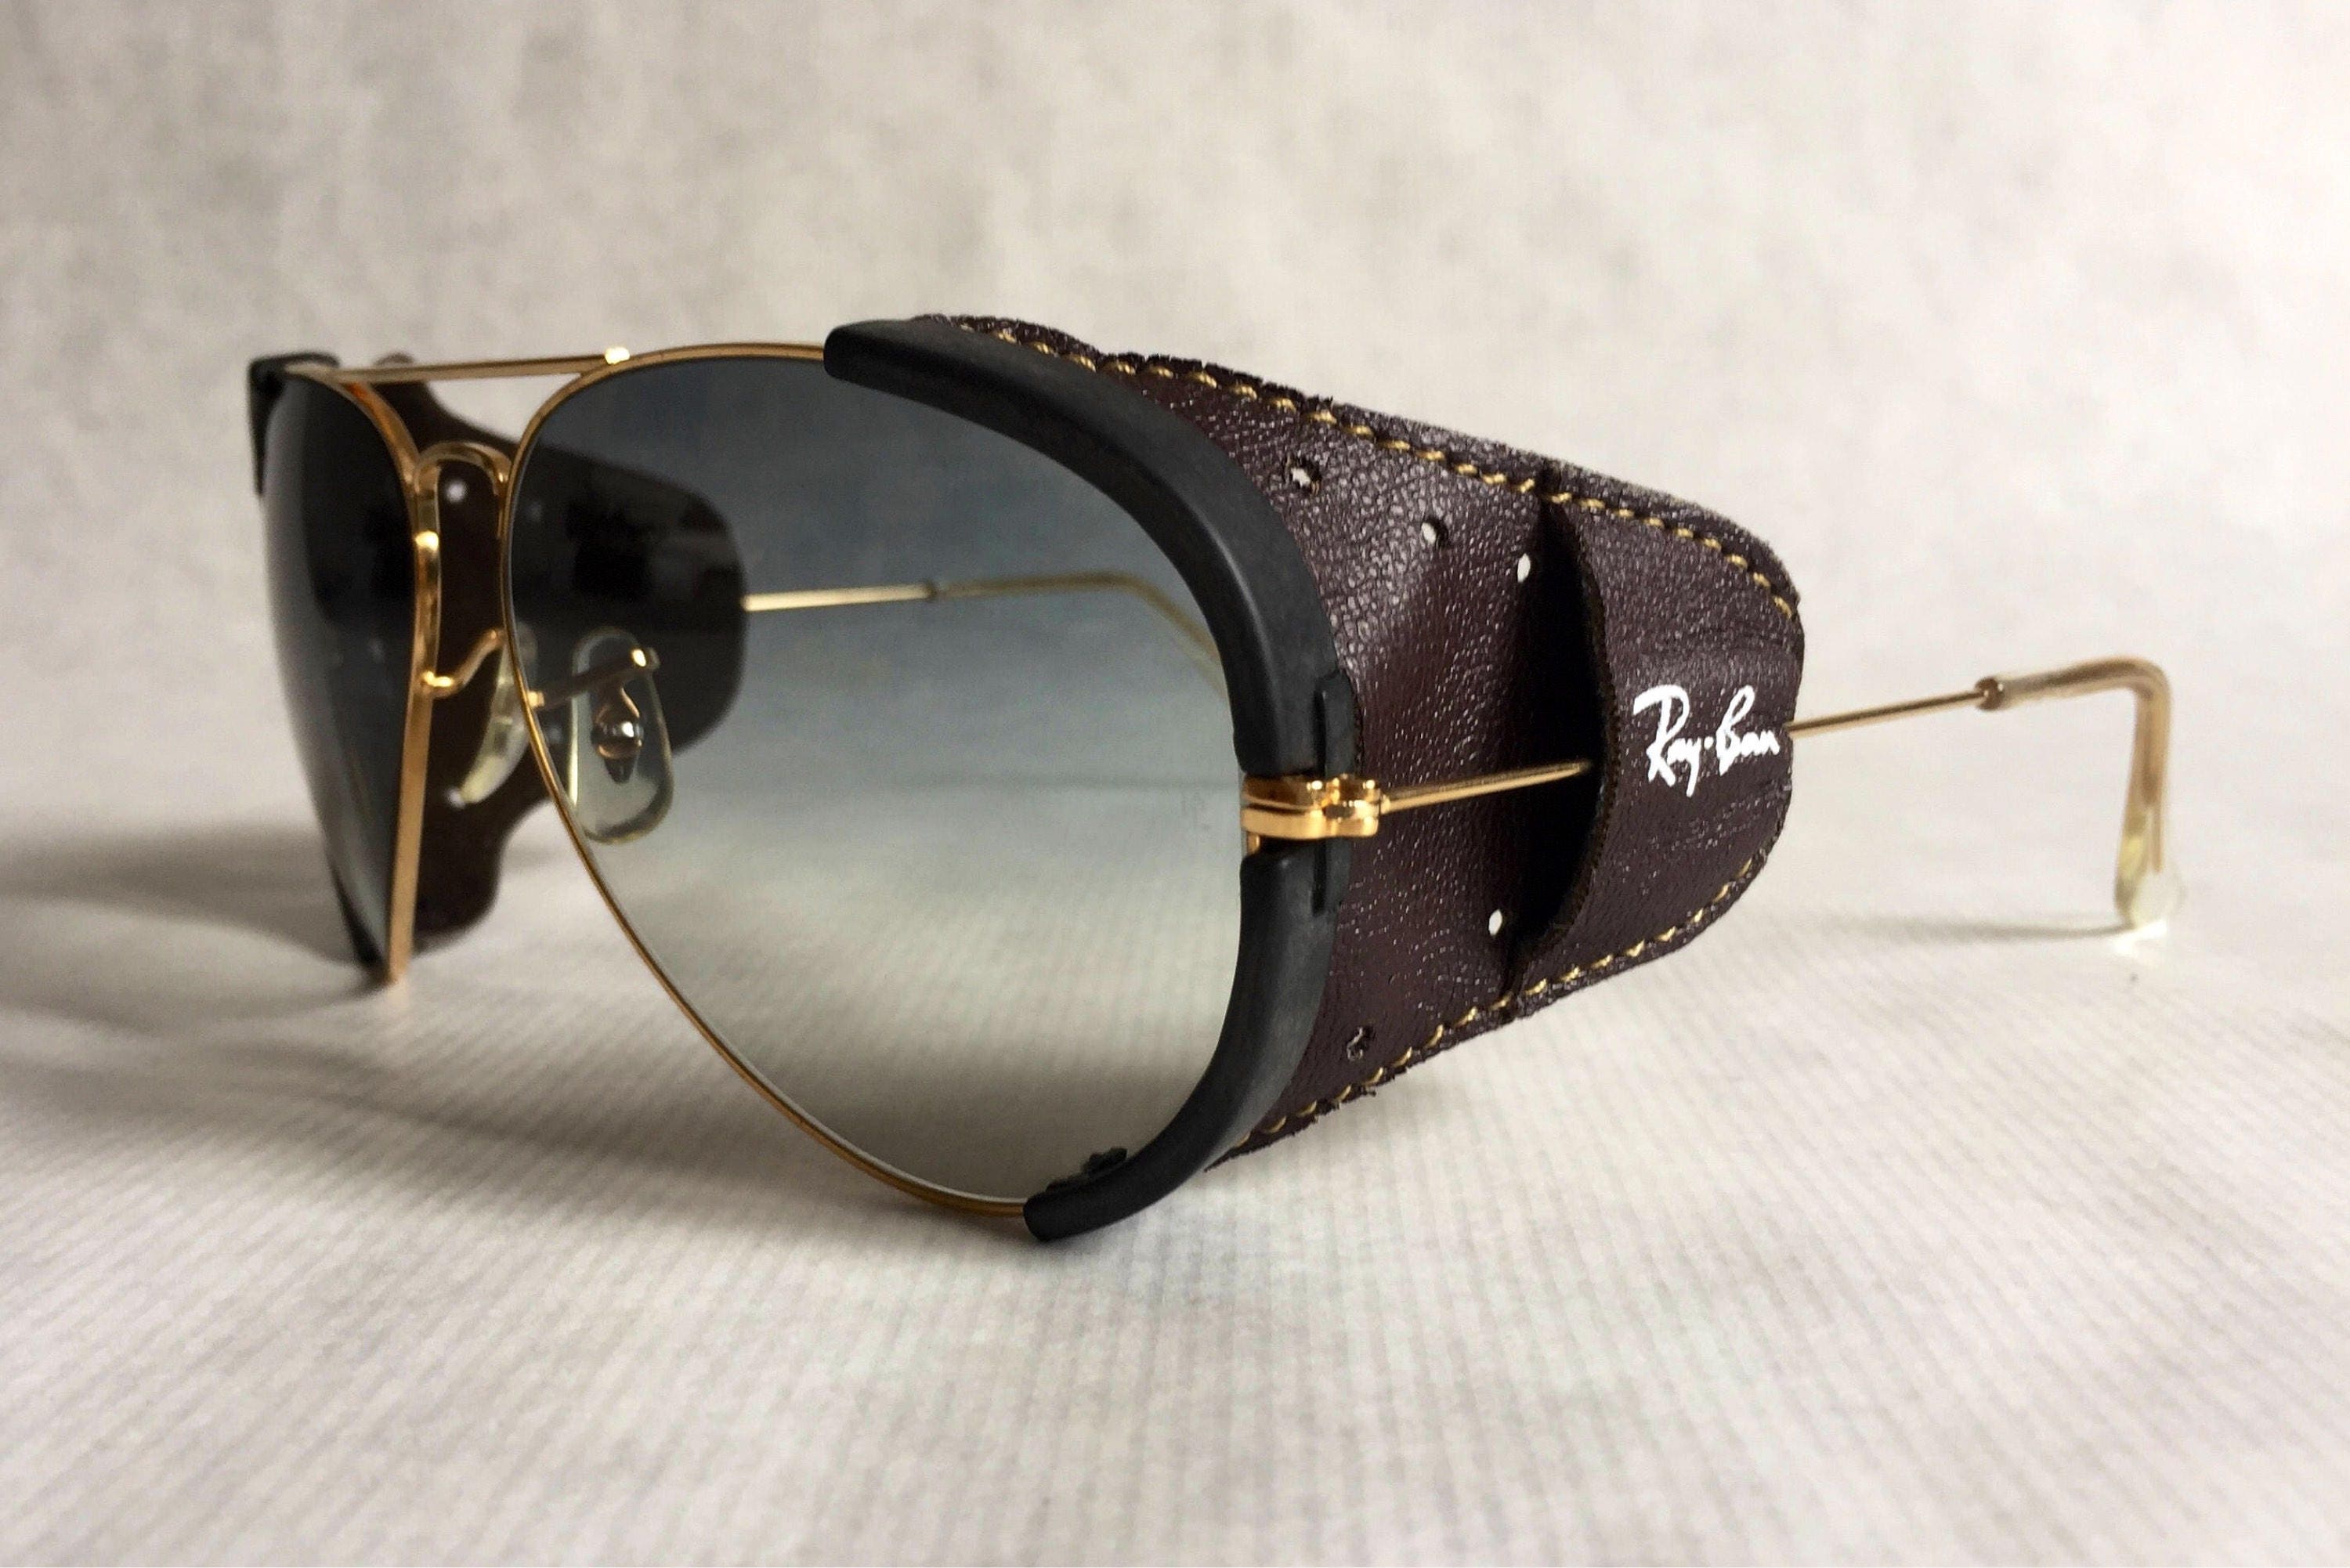 Ray Ban By Bausch And Lomb Glacier Aviator Vintage Sunglasses New Unworn Deadstock